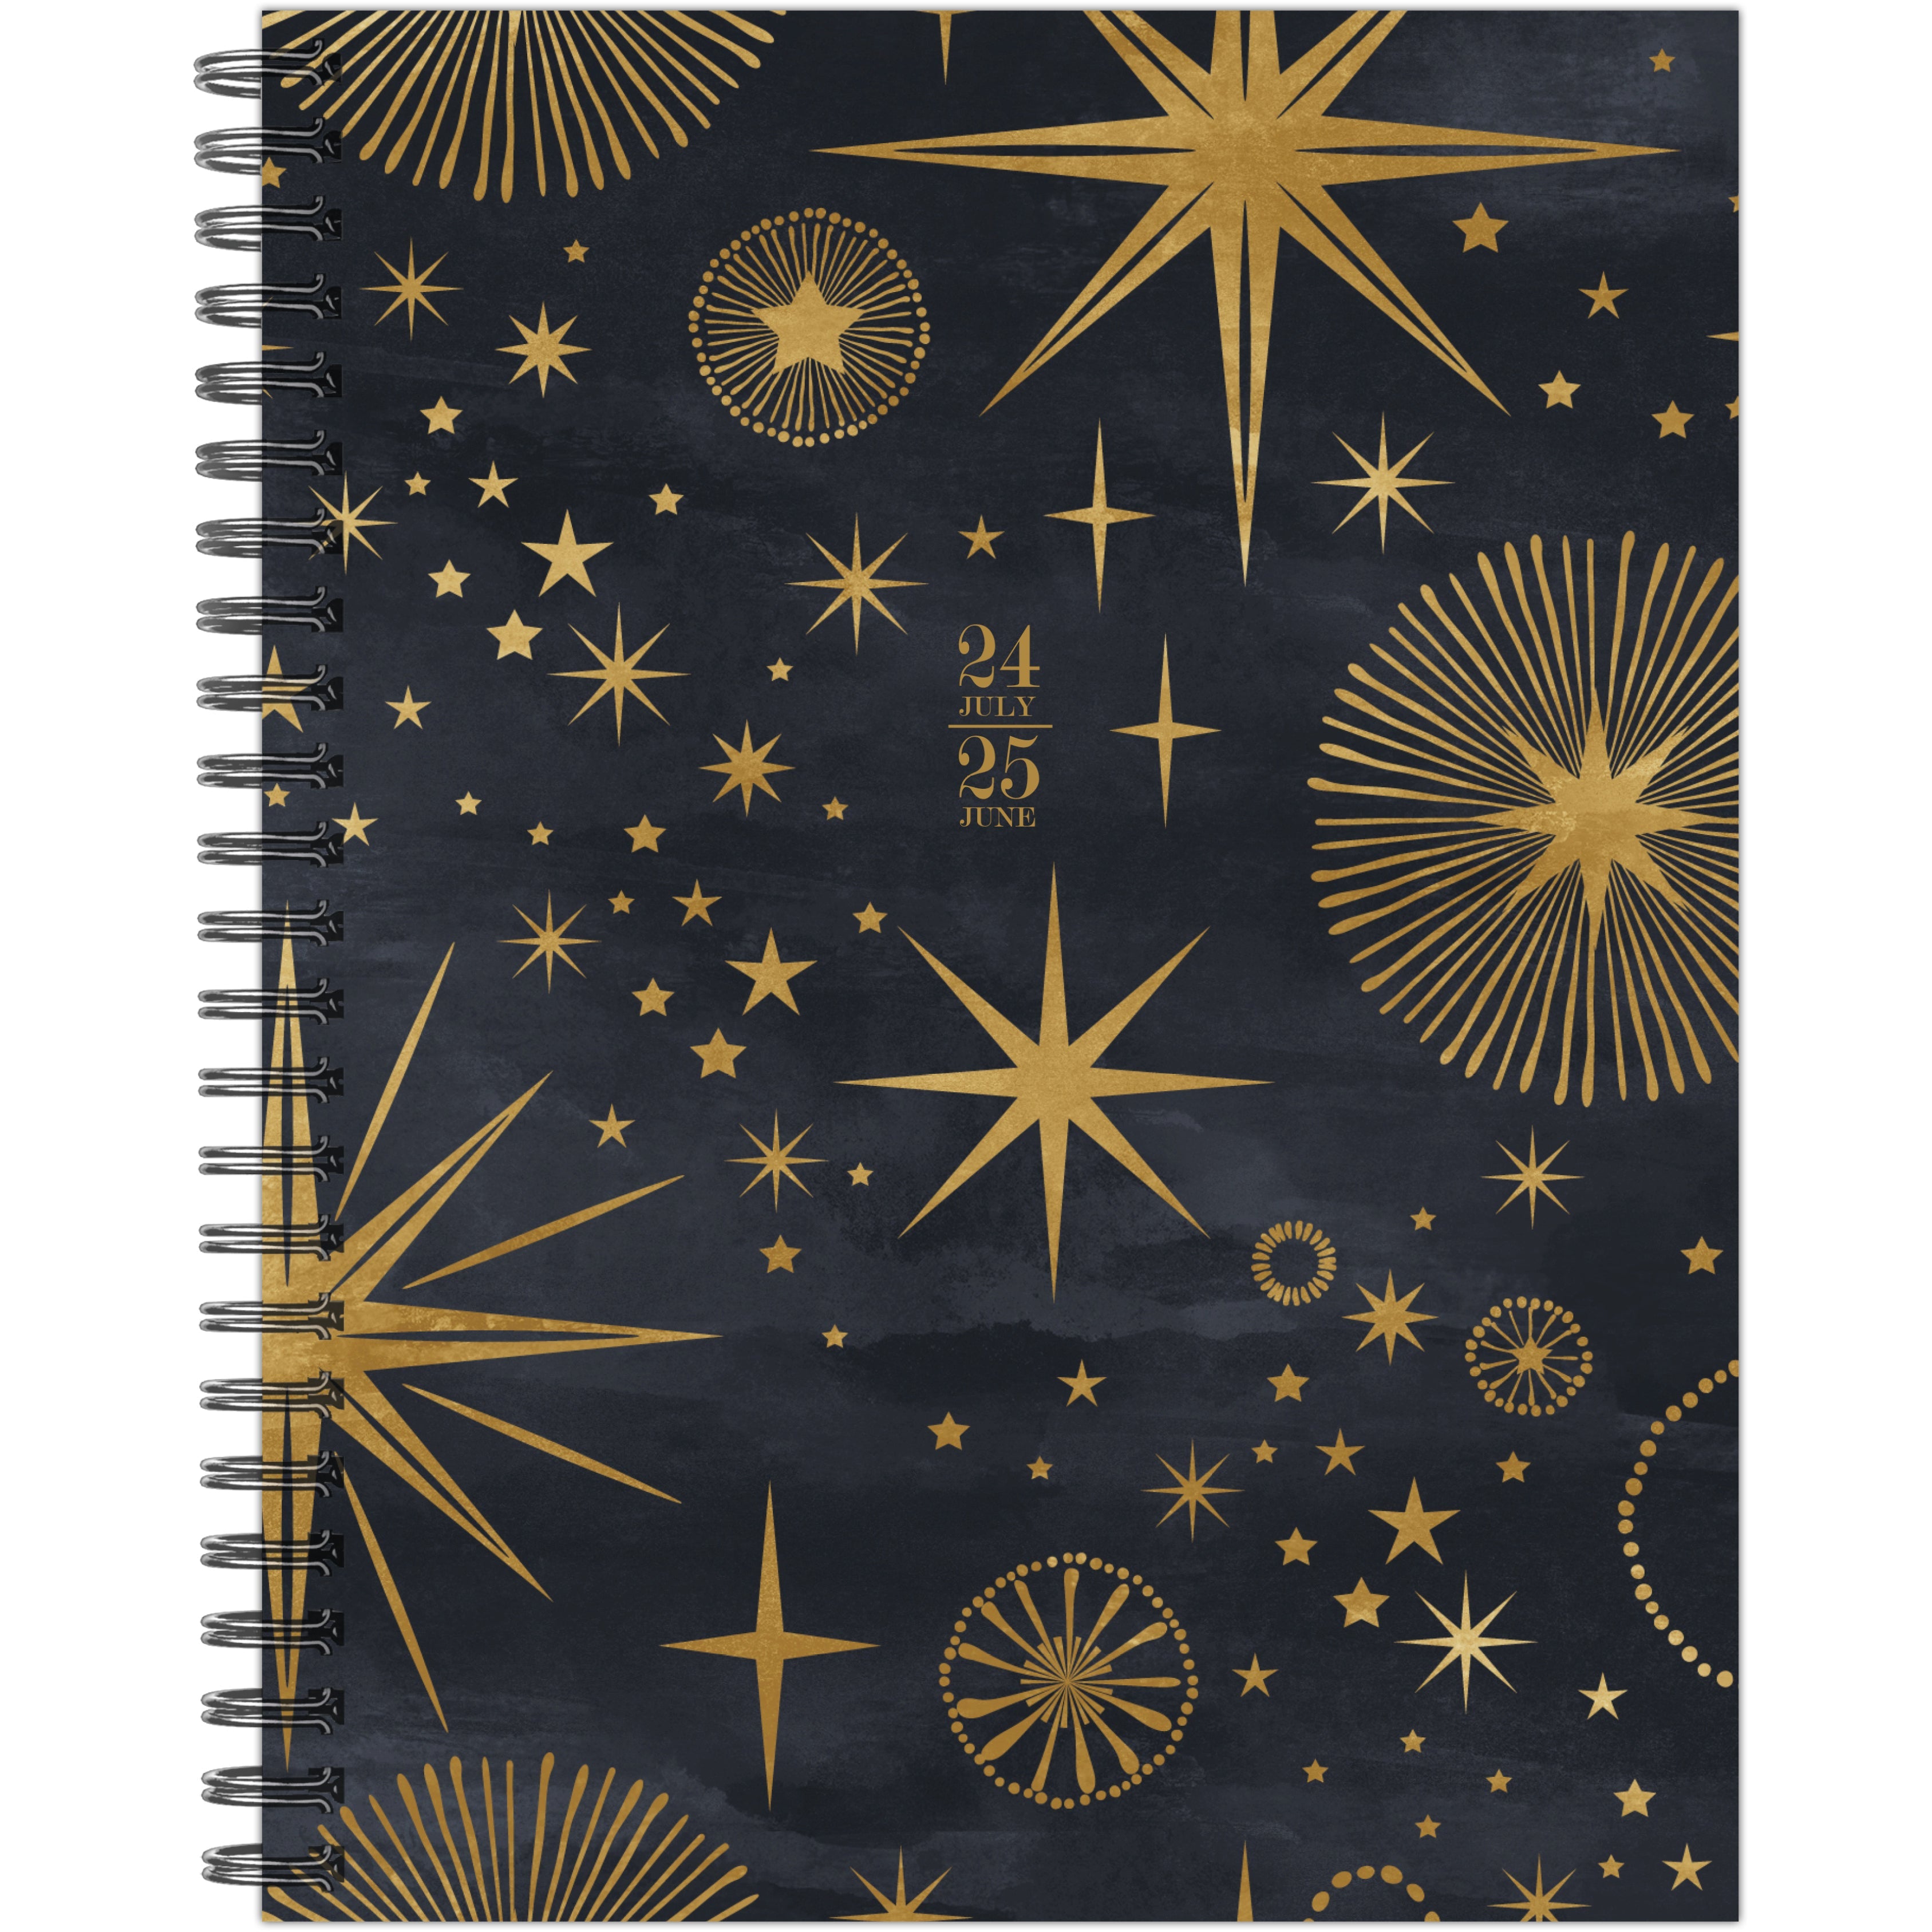 July 2024 - June 2025 Celestial Magic - Large Weekly & Monthly Academic Year Diary/Planner